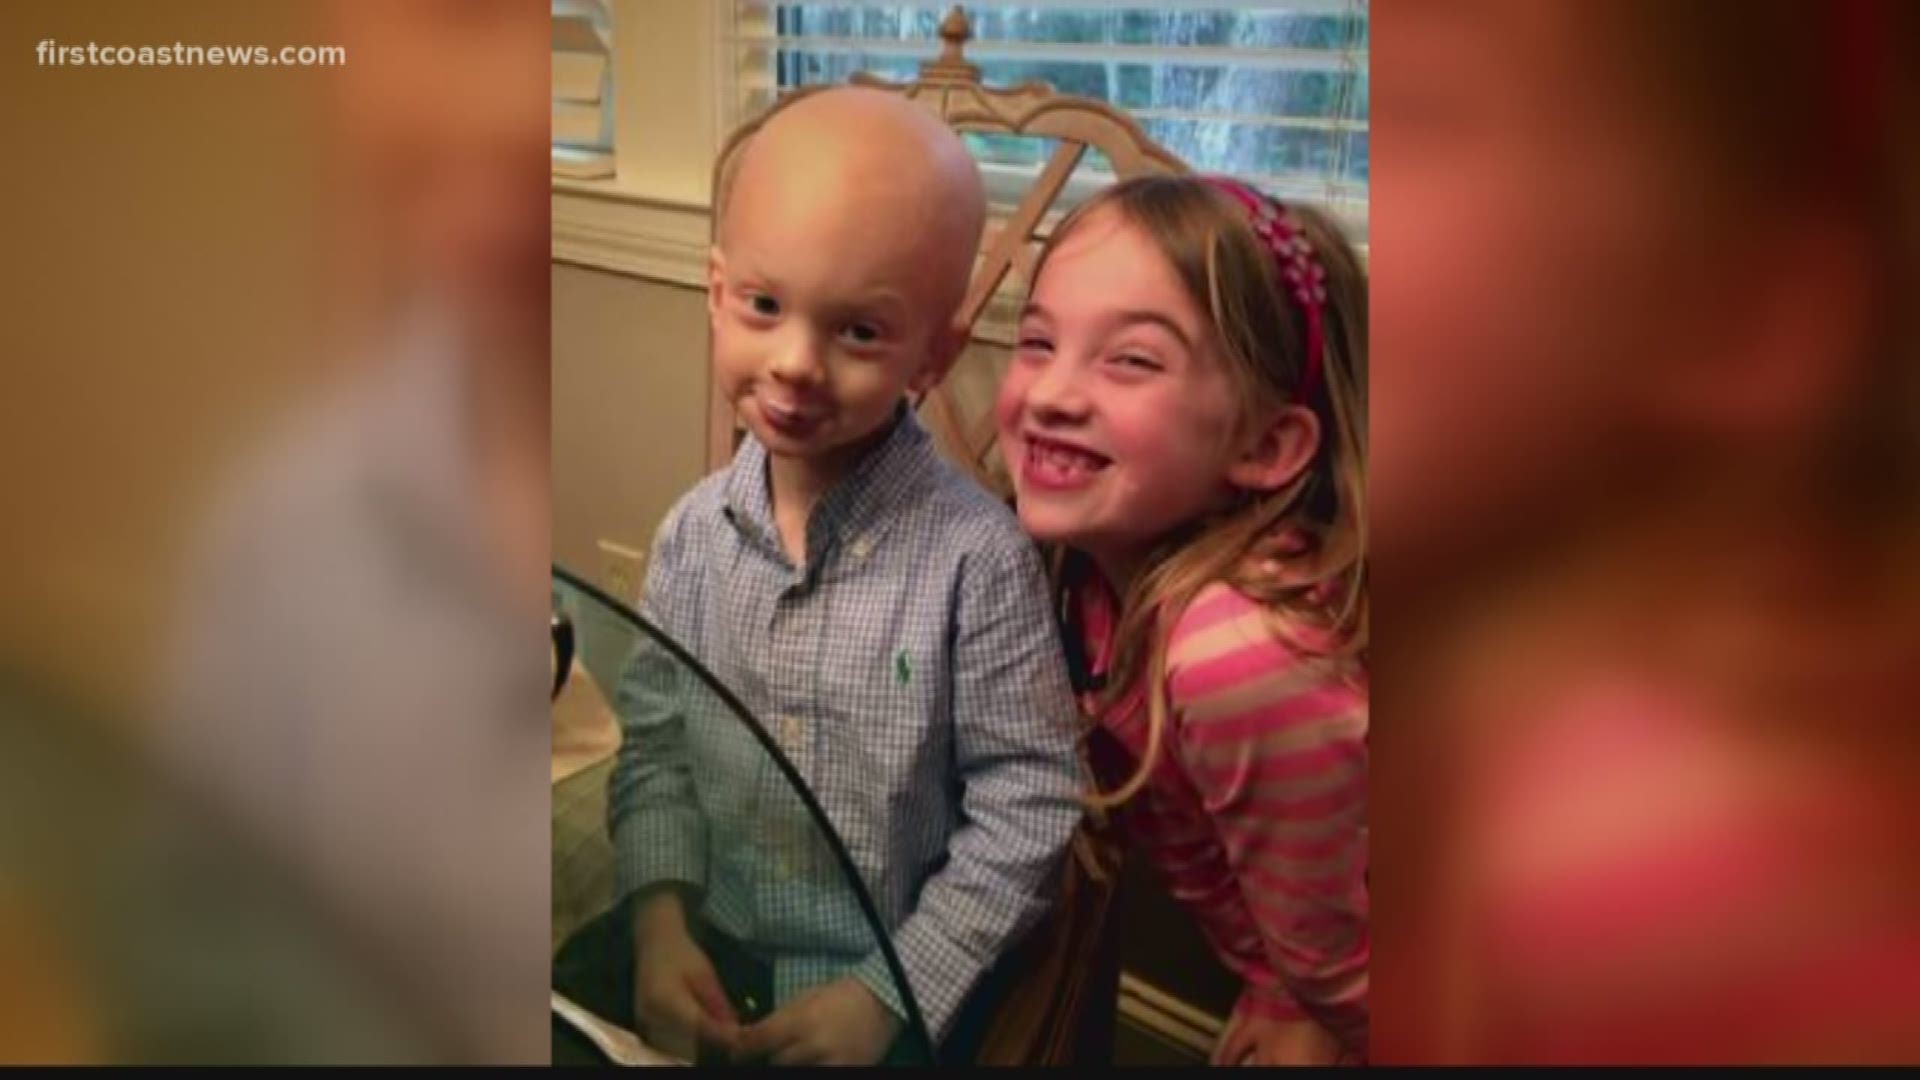 In Summer 2015 in Waycross, Georgia, three children were diagnosed with Rhabdomyoscarcoma and a fourth with Ewing Sarcoma, all within a 60 day period. Harris Lott is one of those children.